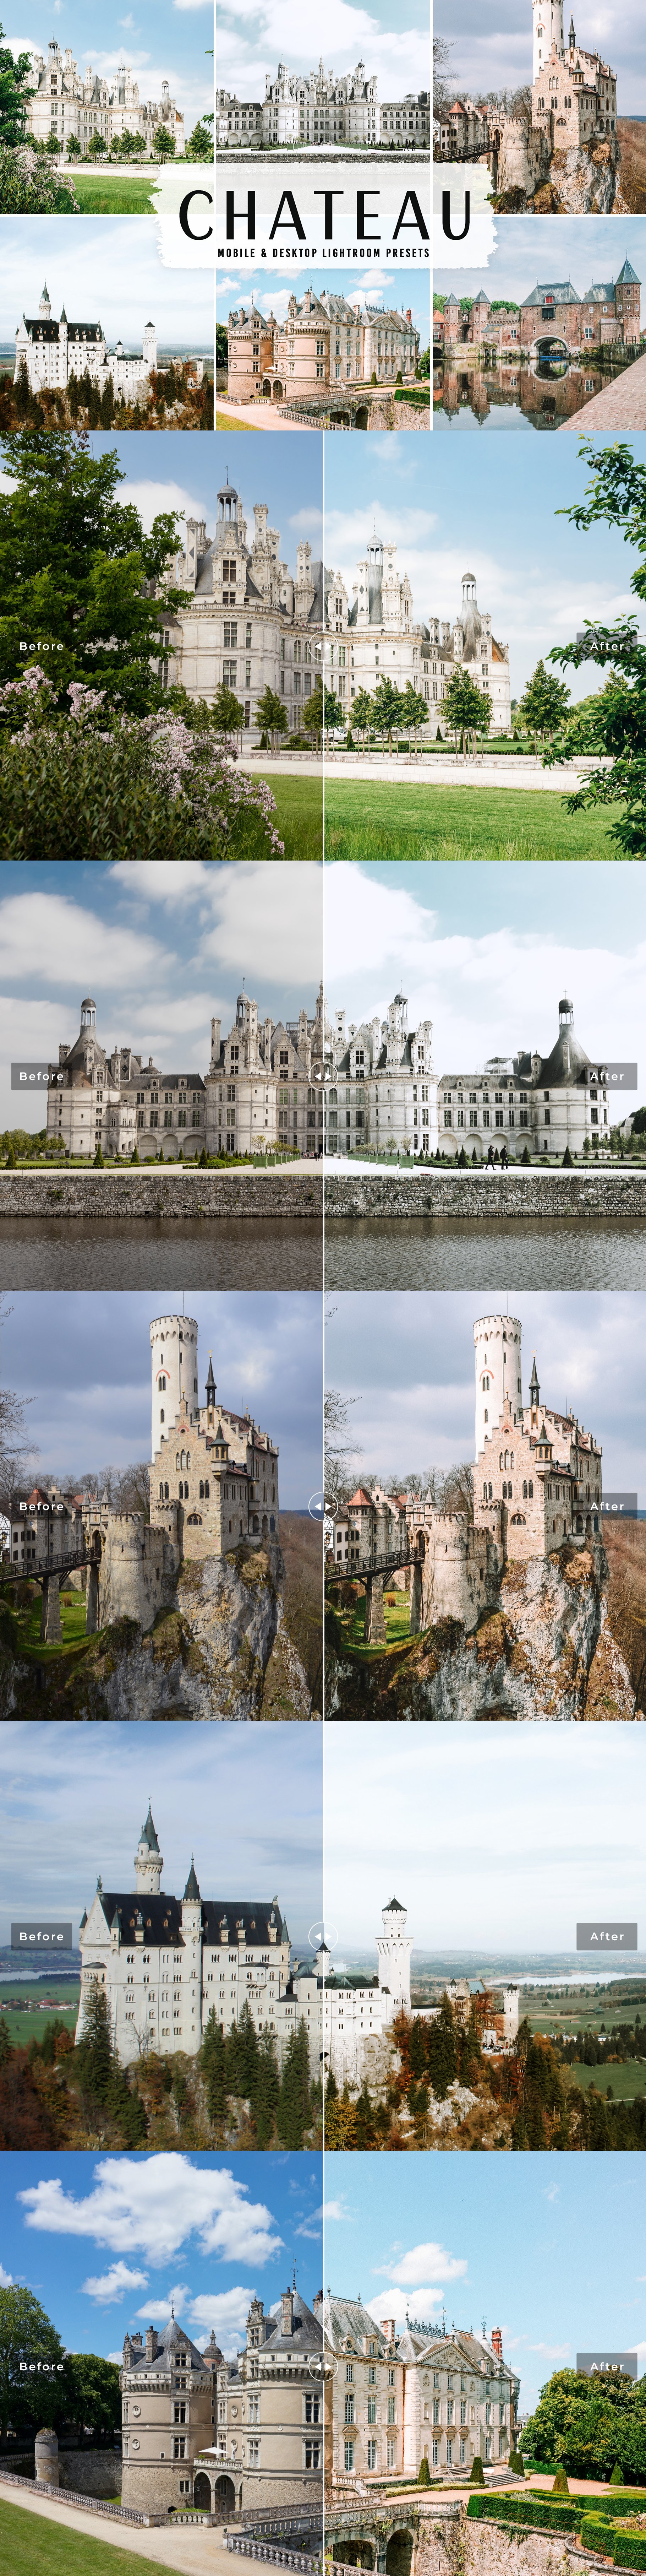 Chateau Pro Lightroom Presetscover image.